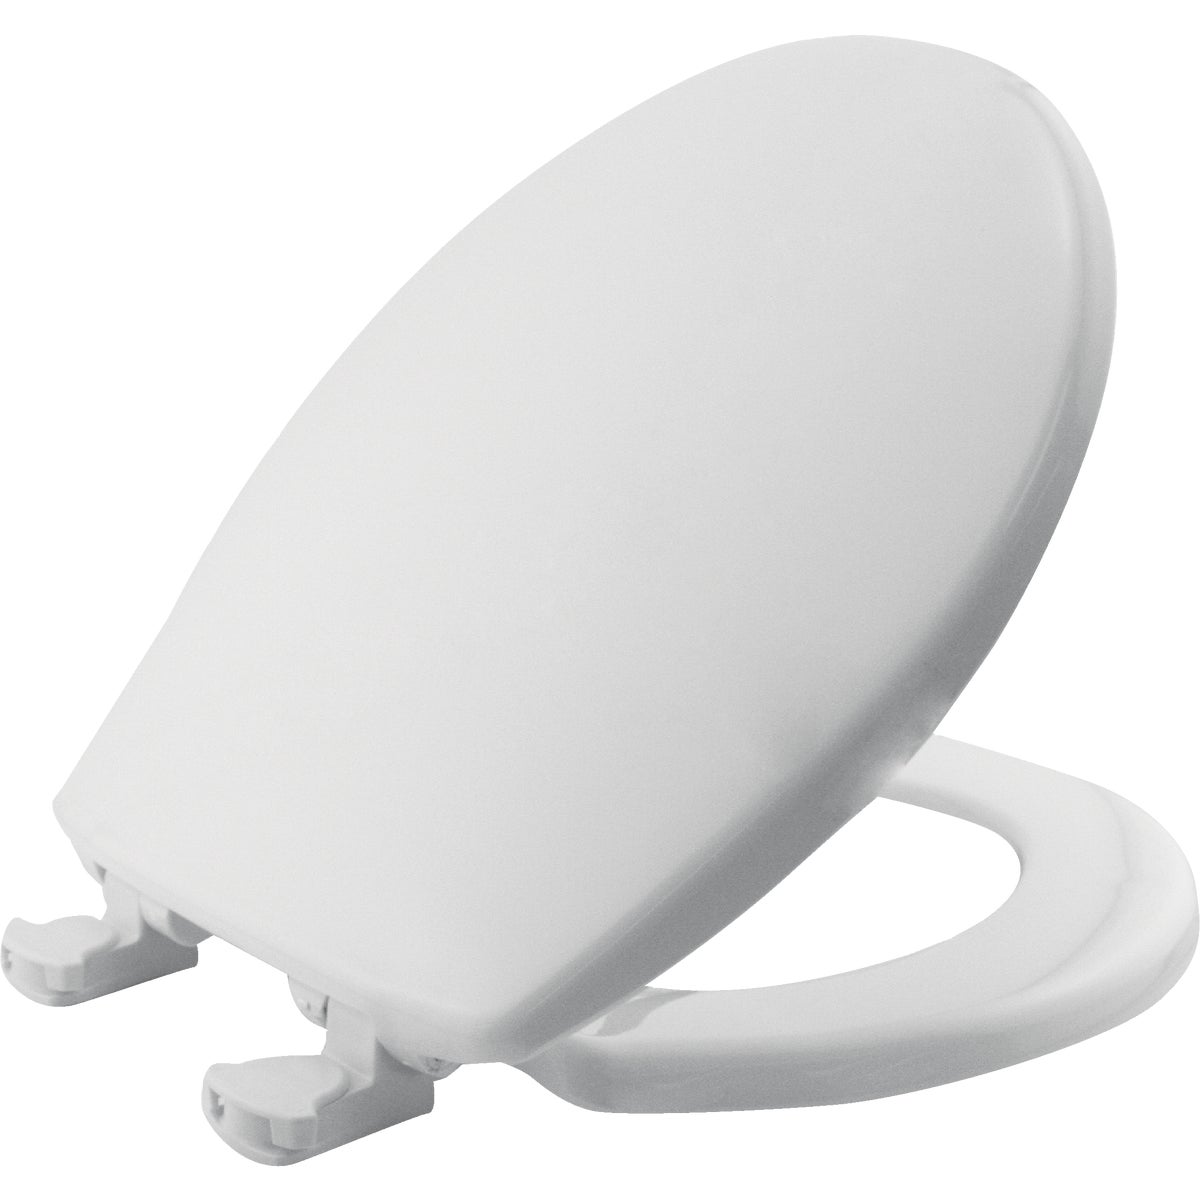 Mayfair Round Closed Front Slow Close White Plastic Toilet Seat